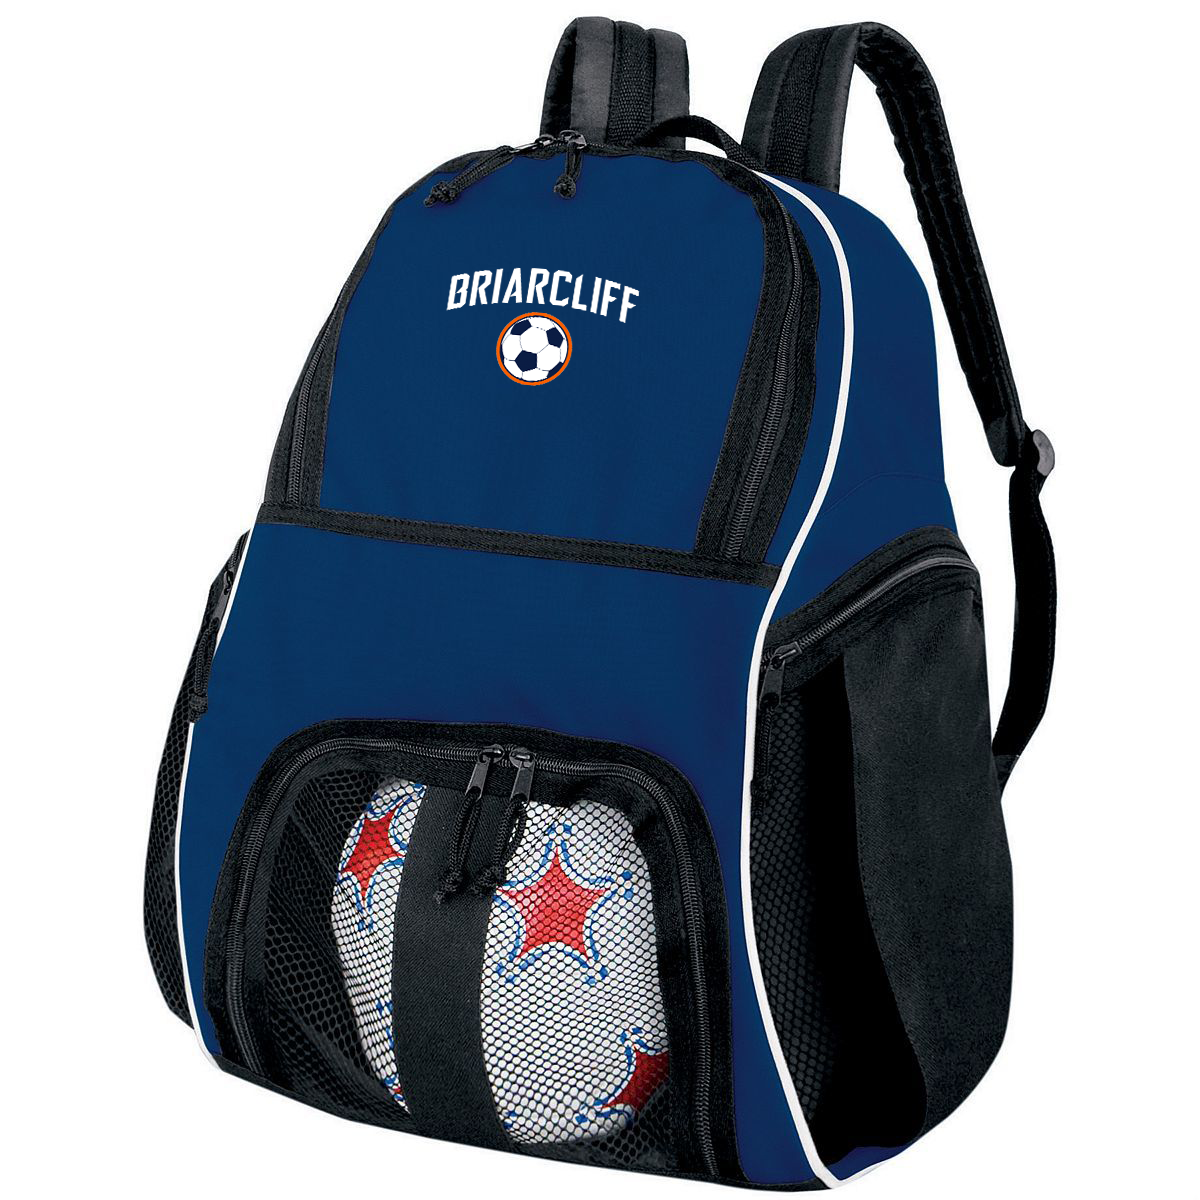 Briarcliff Soccer Player Backpack